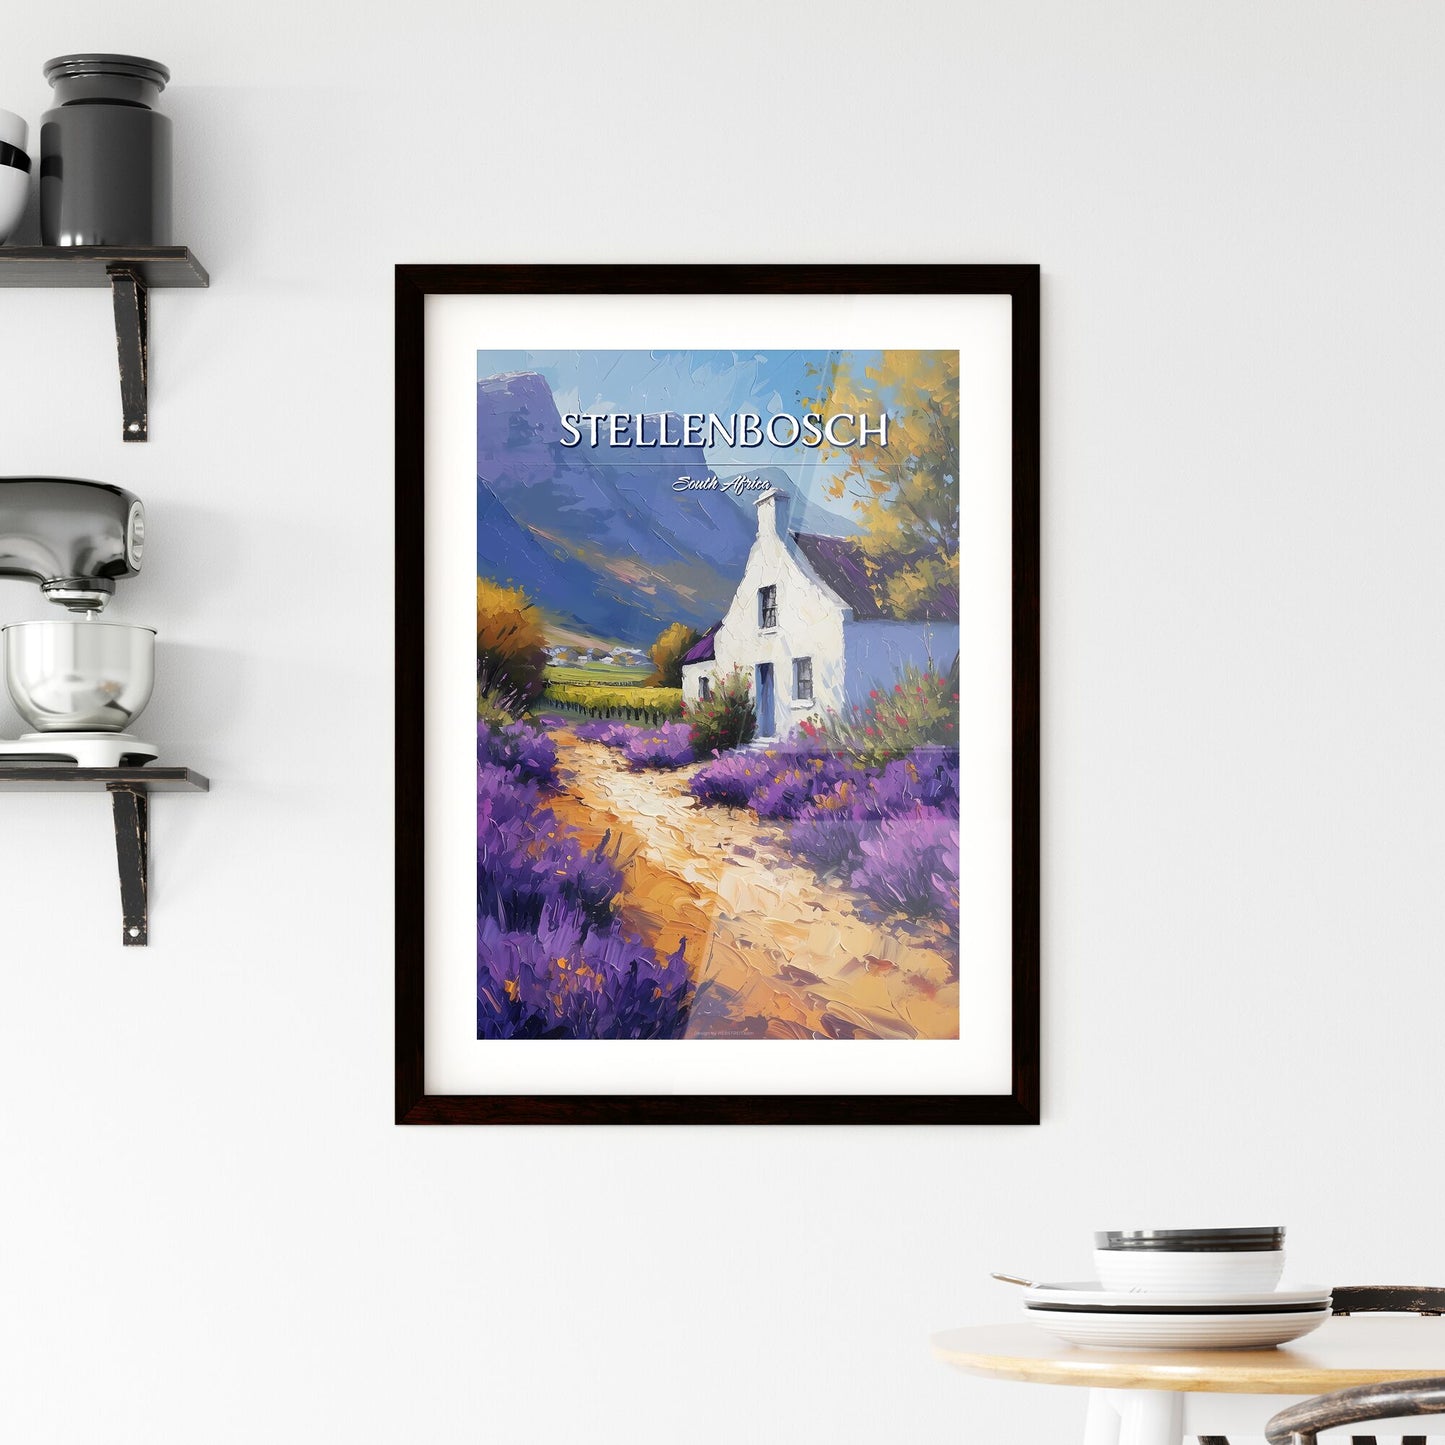 Stellenbosch, South Africa - Art print of a painting of a house with purple flowers Default Title